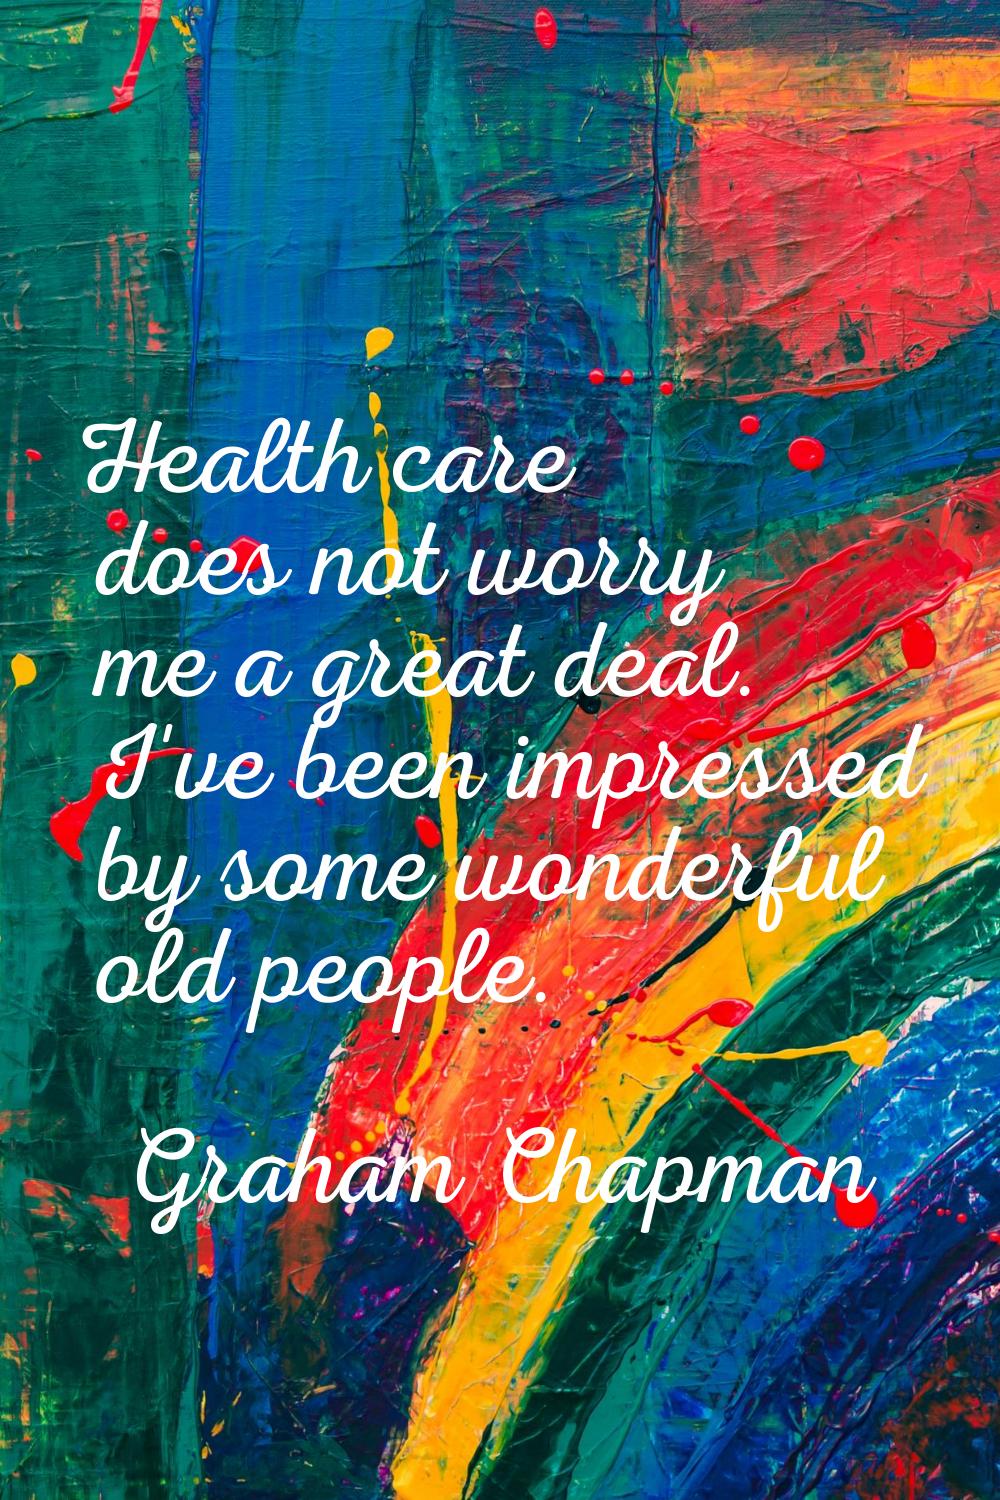 Health care does not worry me a great deal. I've been impressed by some wonderful old people.